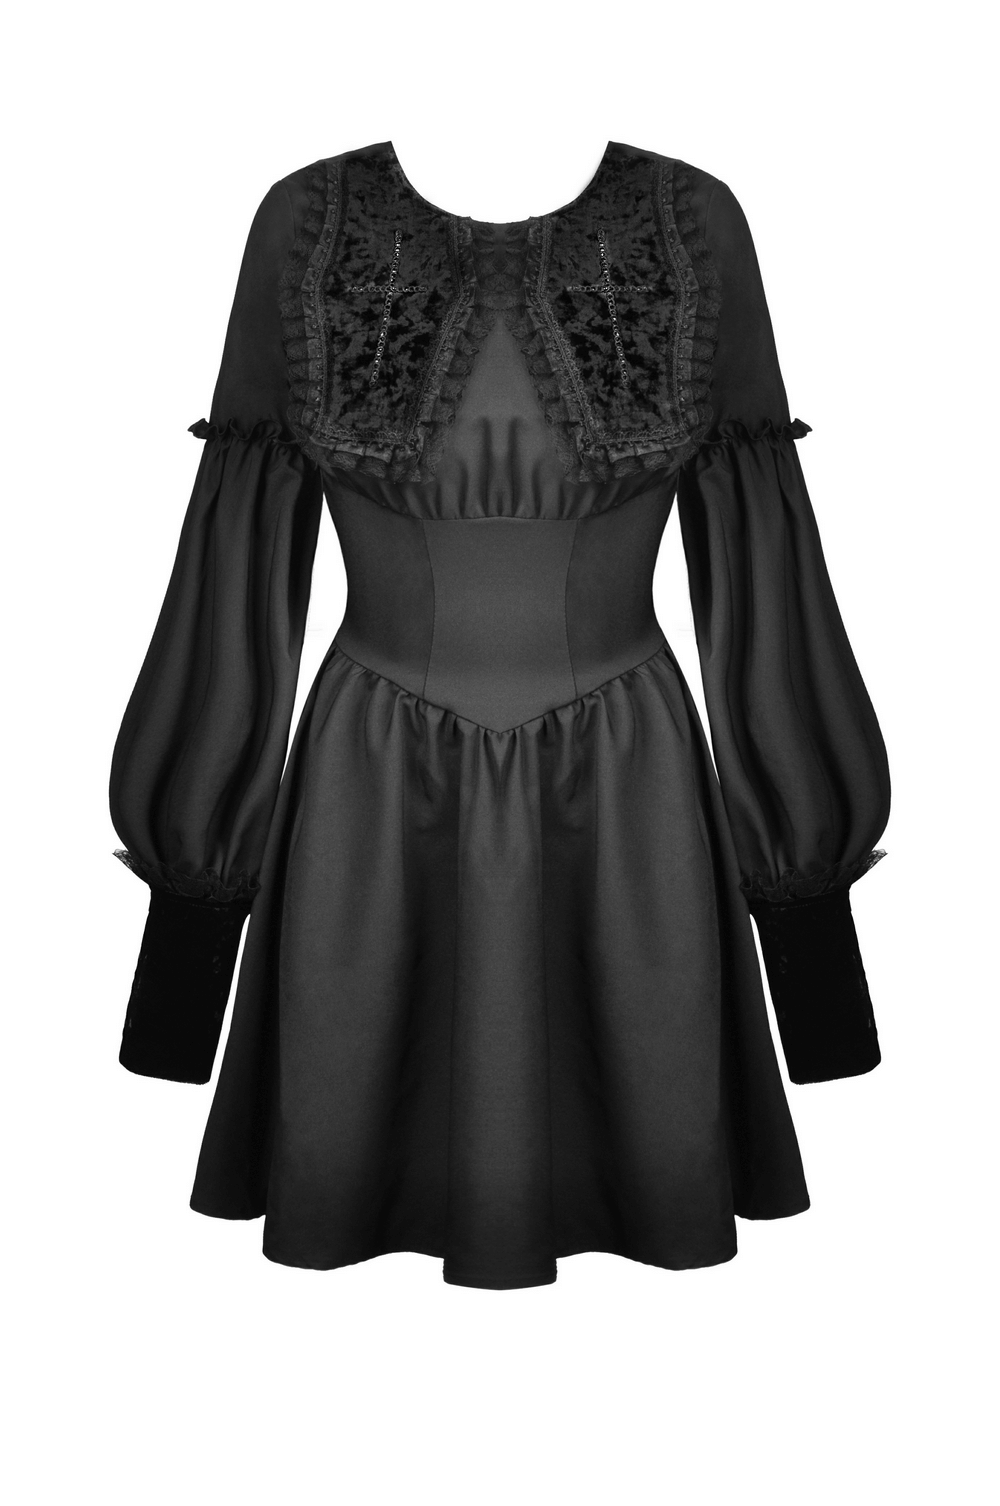 Elegant Gothic Lace Mini Dress with Puff Sleeves